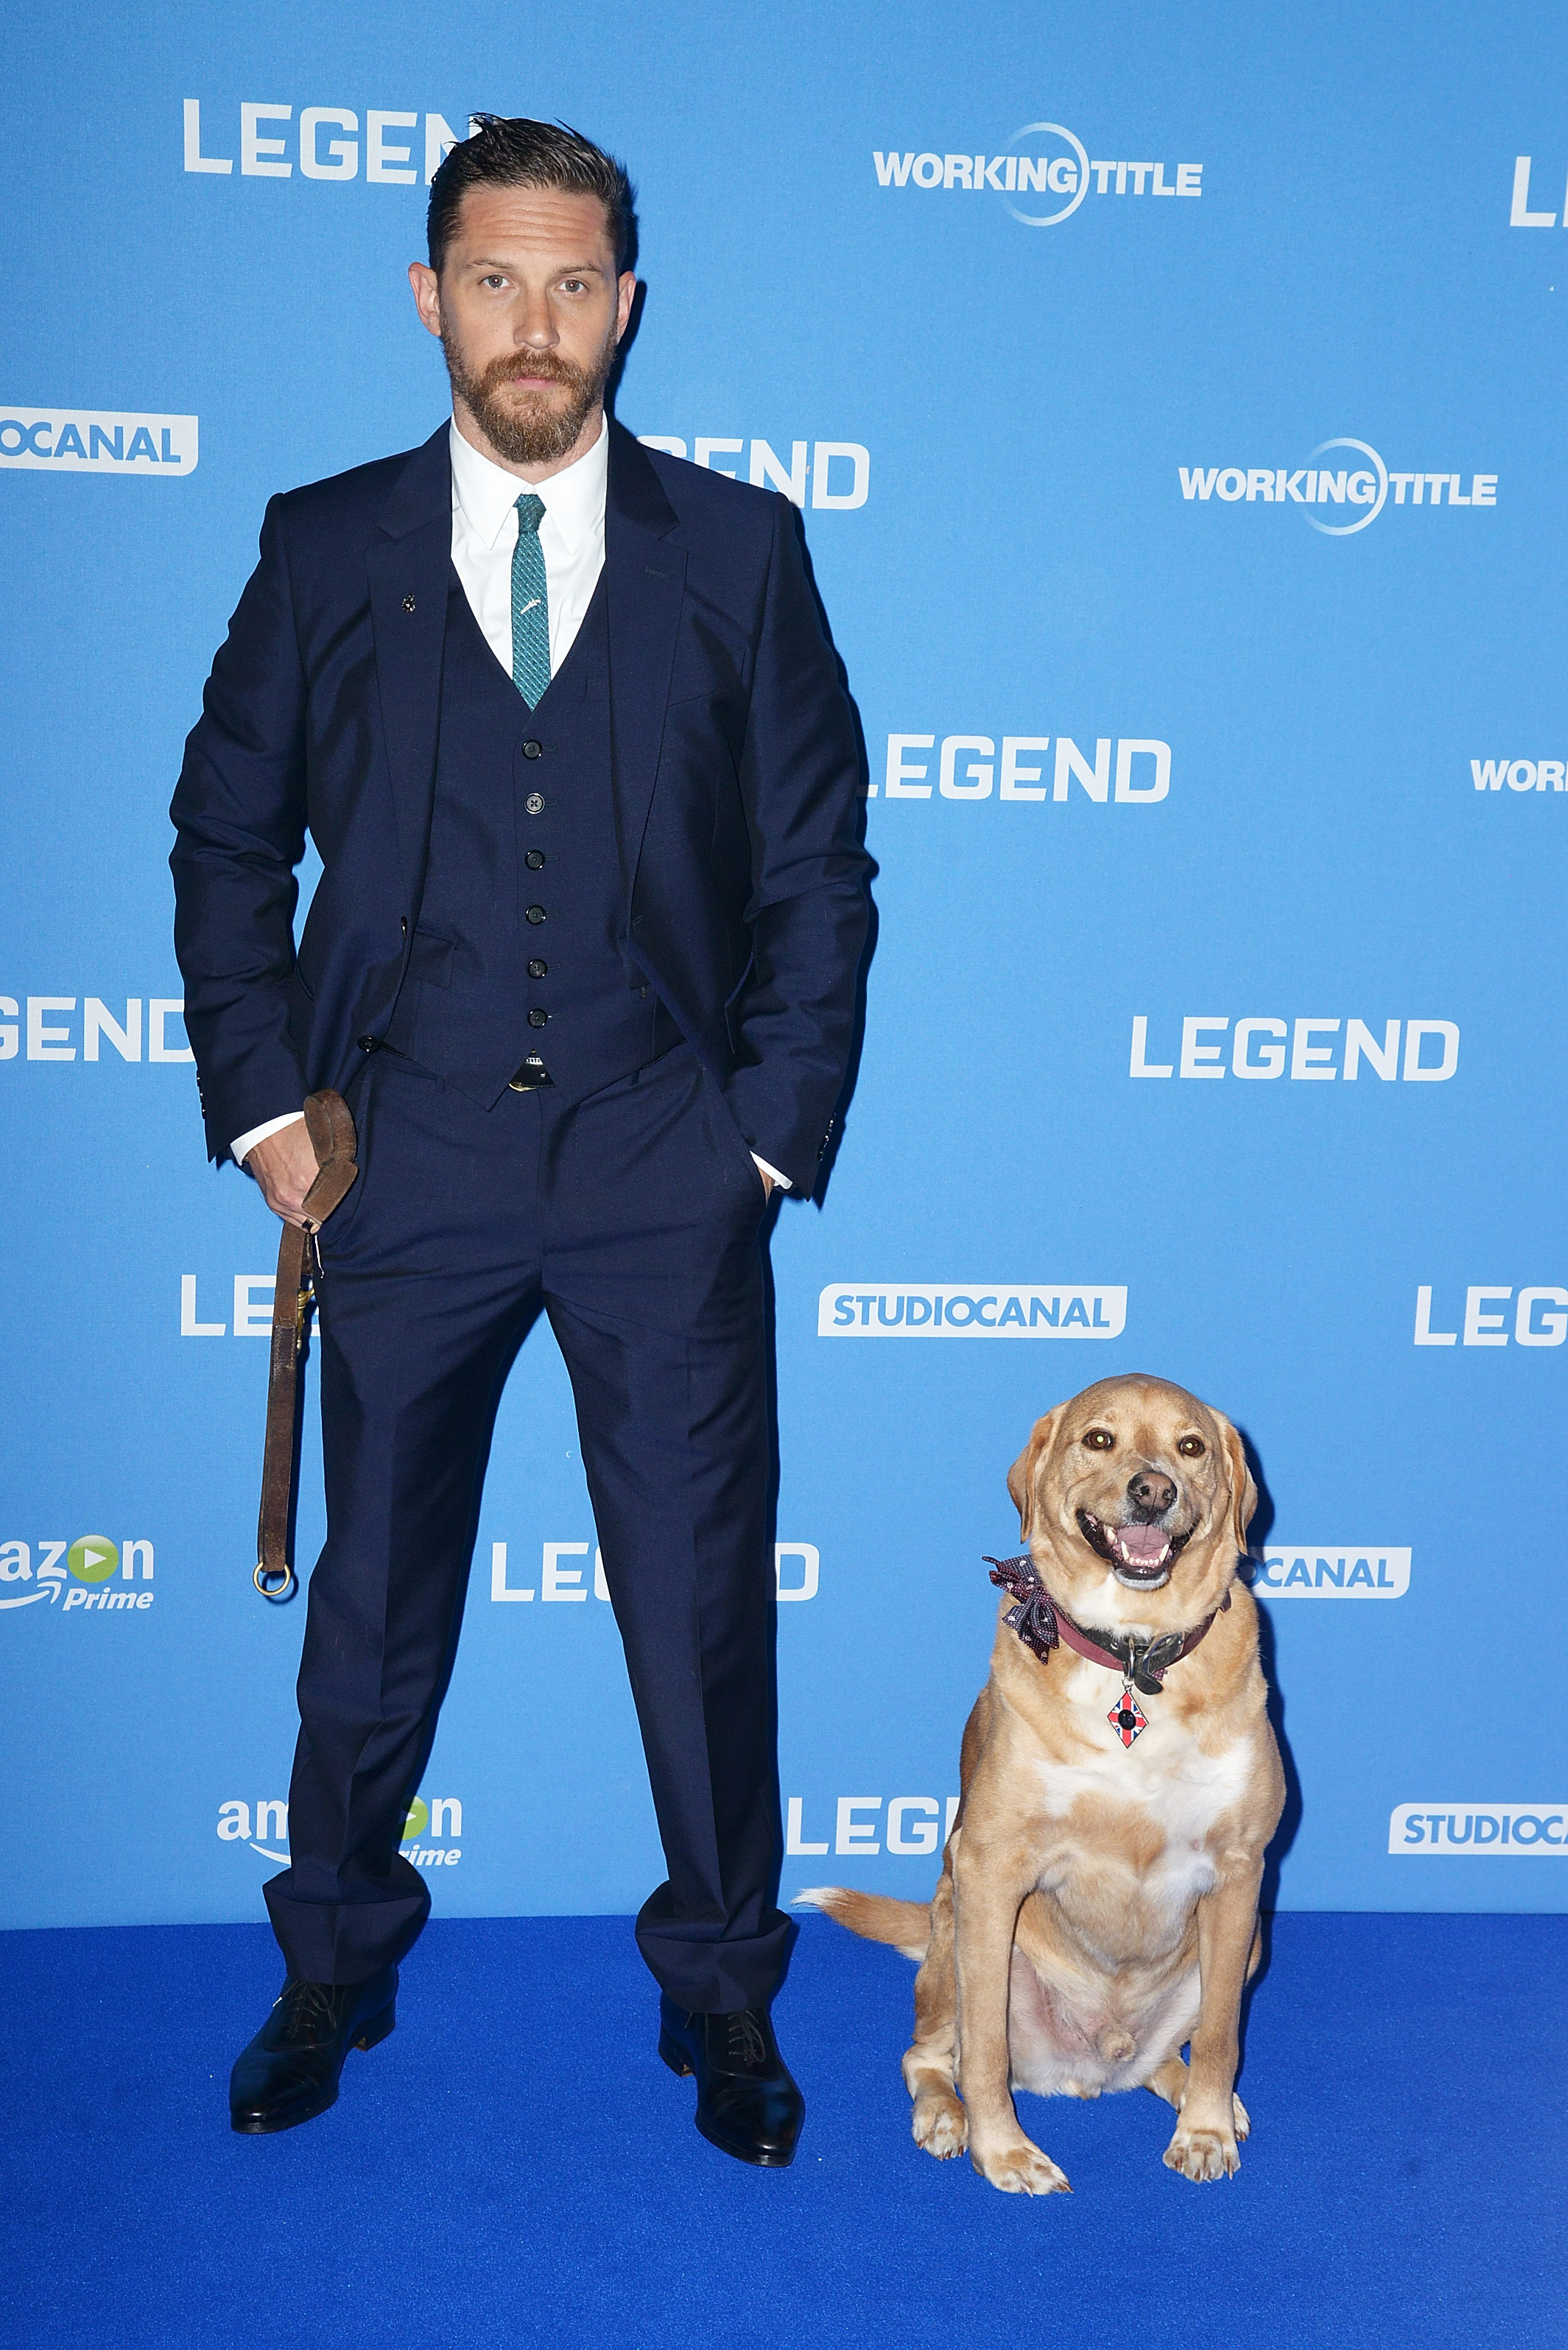 Tom Hardy and dog 'Woody' attend the U.K. Premiere of "Legend" at Odeon Leicester Square on September 3, 2015 in London, England. (Dave J Hogan—Getty Images)